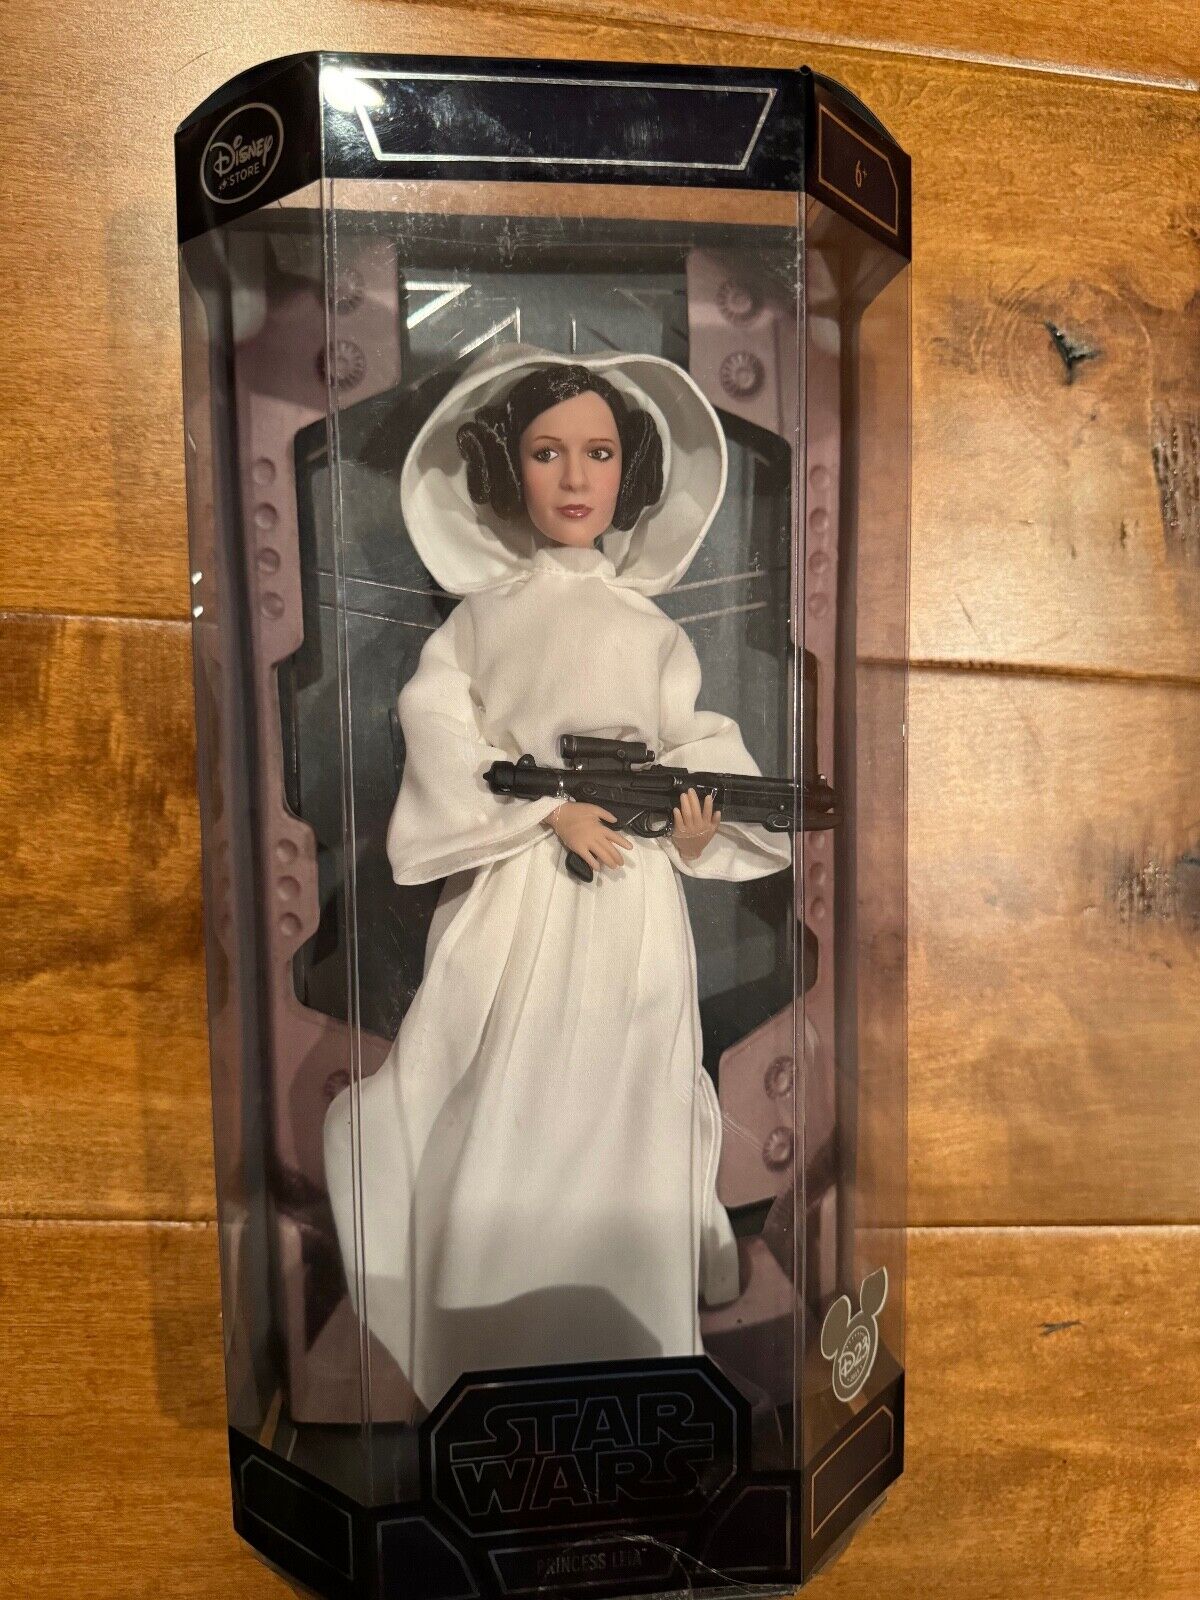 Disney Store D23 Expo Star Wars Princess Leia Doll LE 450 Carrie Fisher NEW